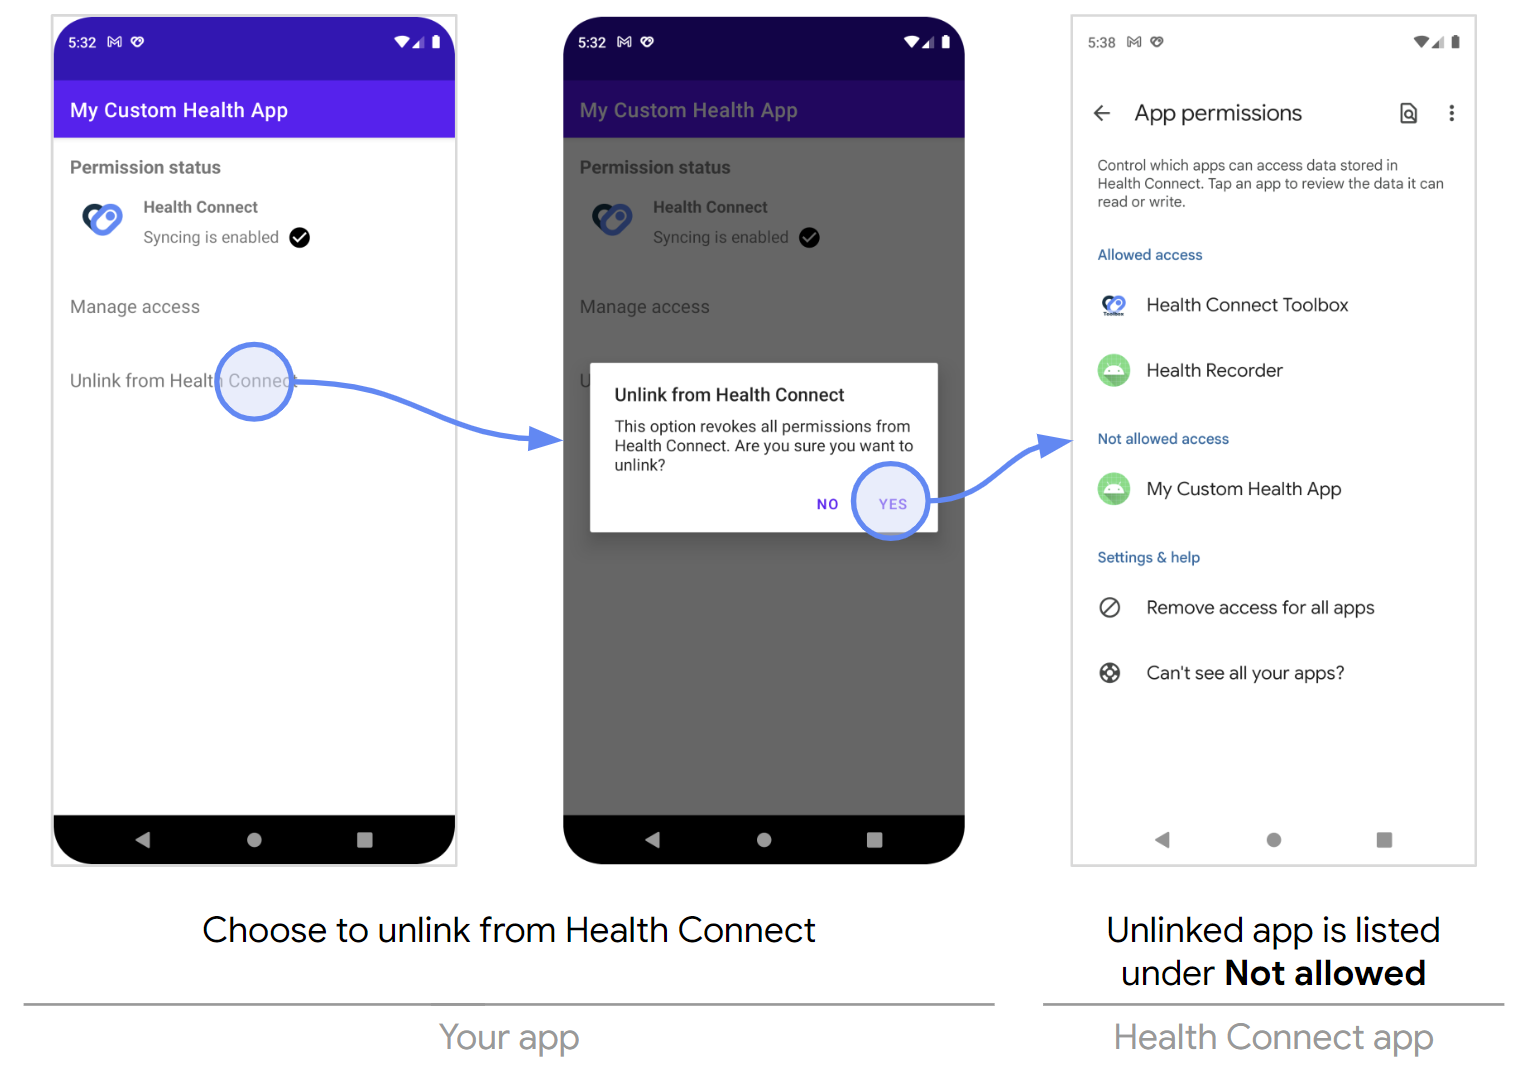 Unlink from Health Connect through your app